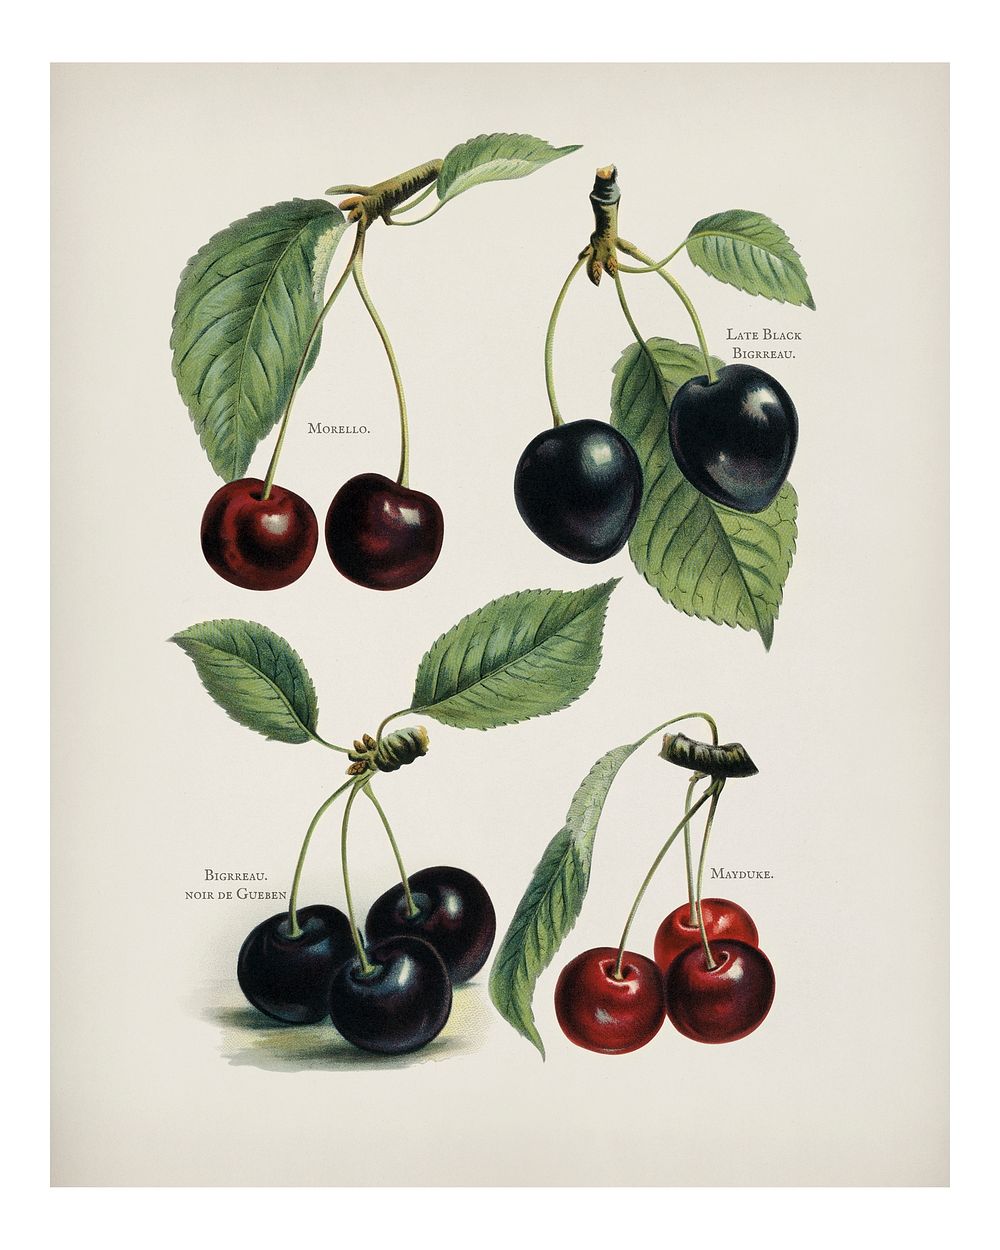 Cherry vintage illustration wall art print and poster design remix from the original artwork.